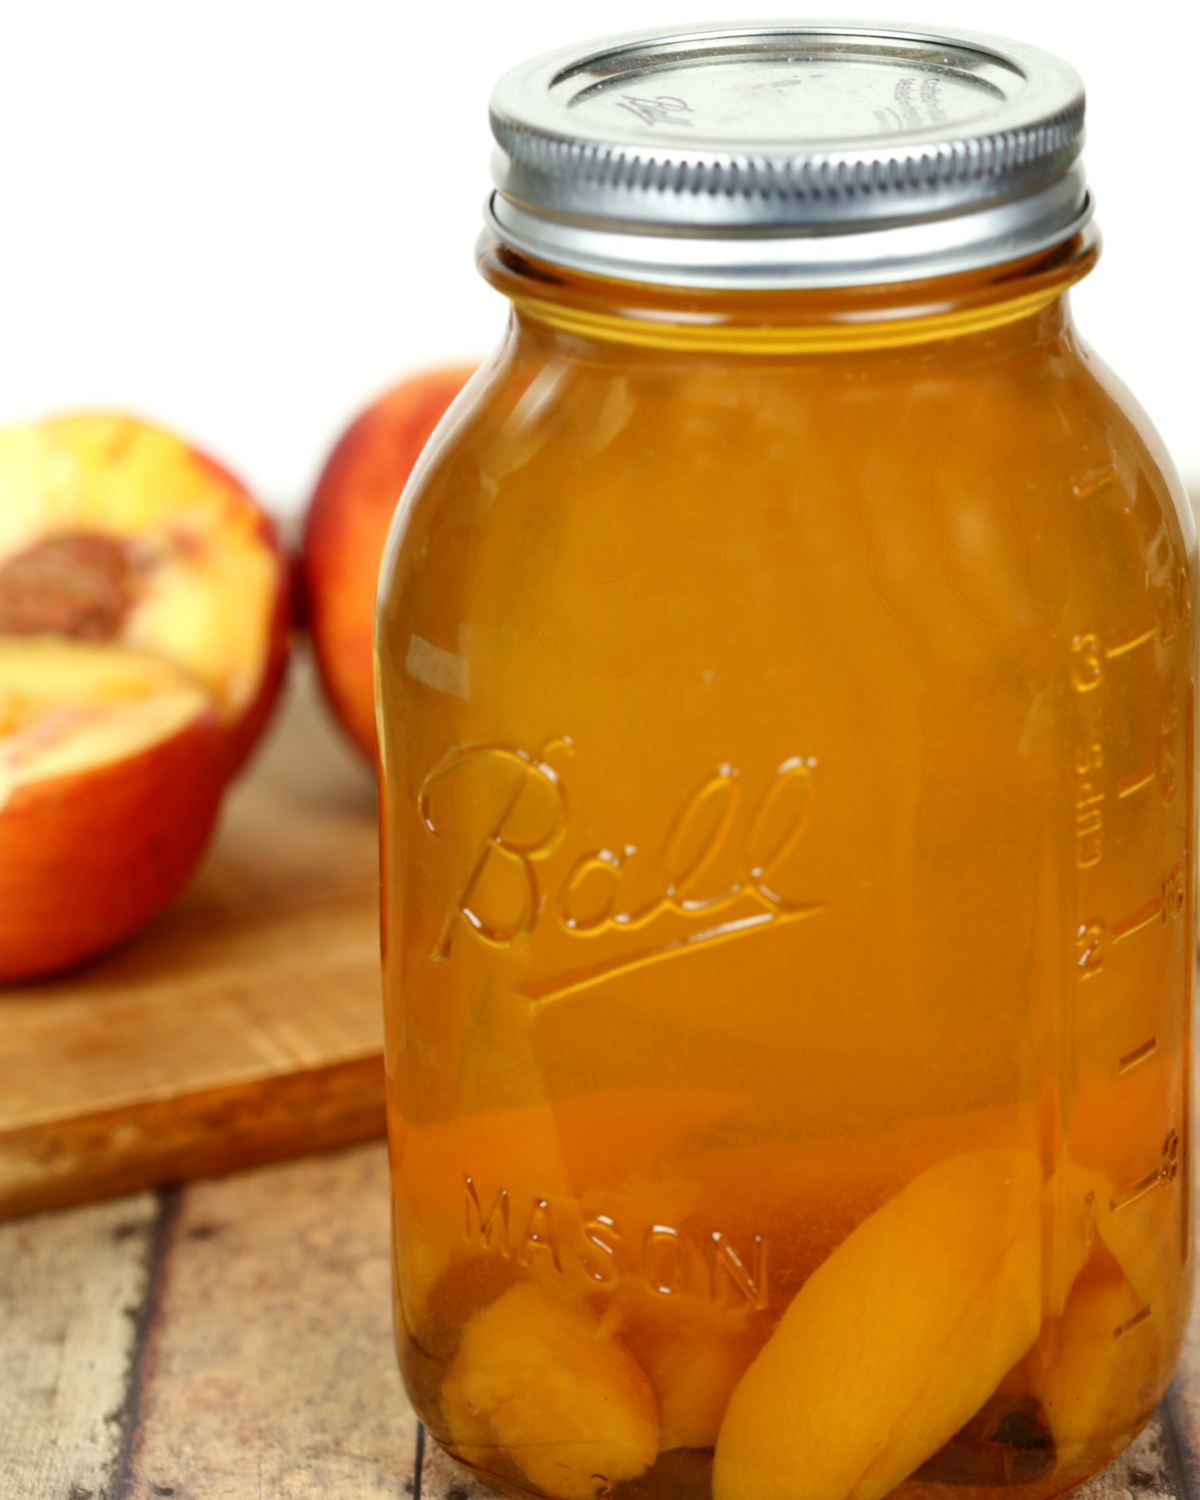 Peach moonshine recipes in a jar with sliced peaches.